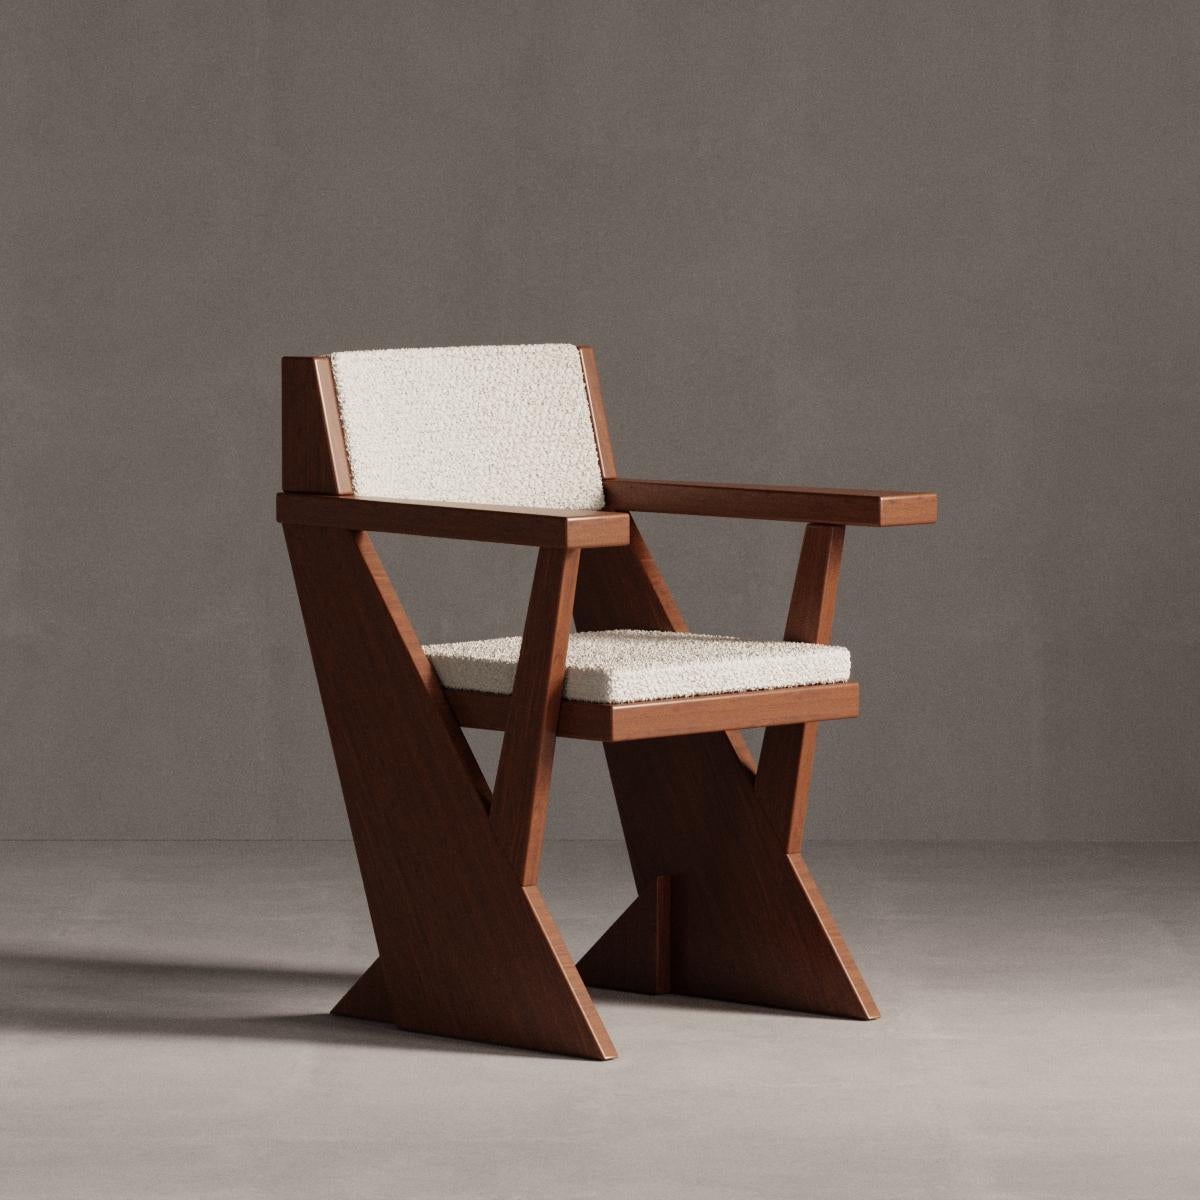 Brown Pierre Chair by Plyus Design
Dimensions: D 63 x W 69 x H 88 cm
Materials:  Wood, HR foam, polyester wadding, fabric upholstery.



PLYUS Furniture creates pieces in collectible design segment. We create modern, ergonomic furniture in a